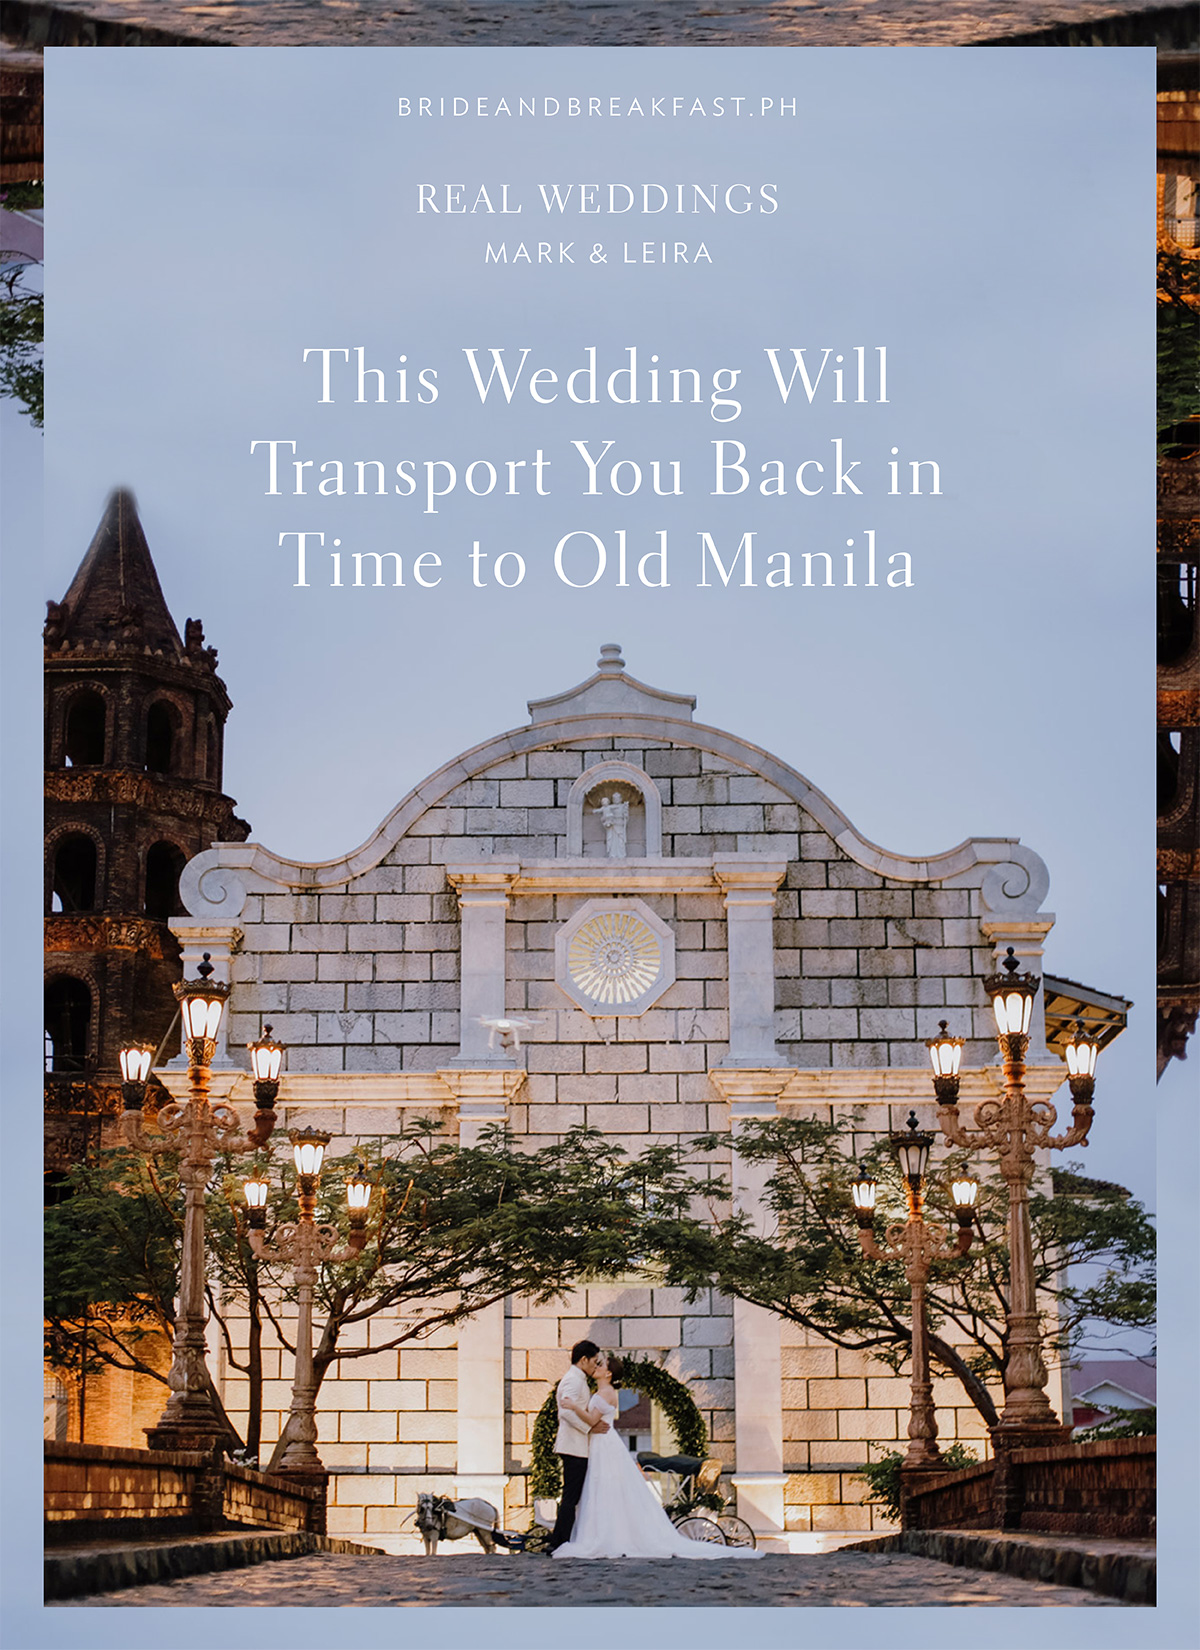 This Wedding will Transport You Back in Time to Old Manila